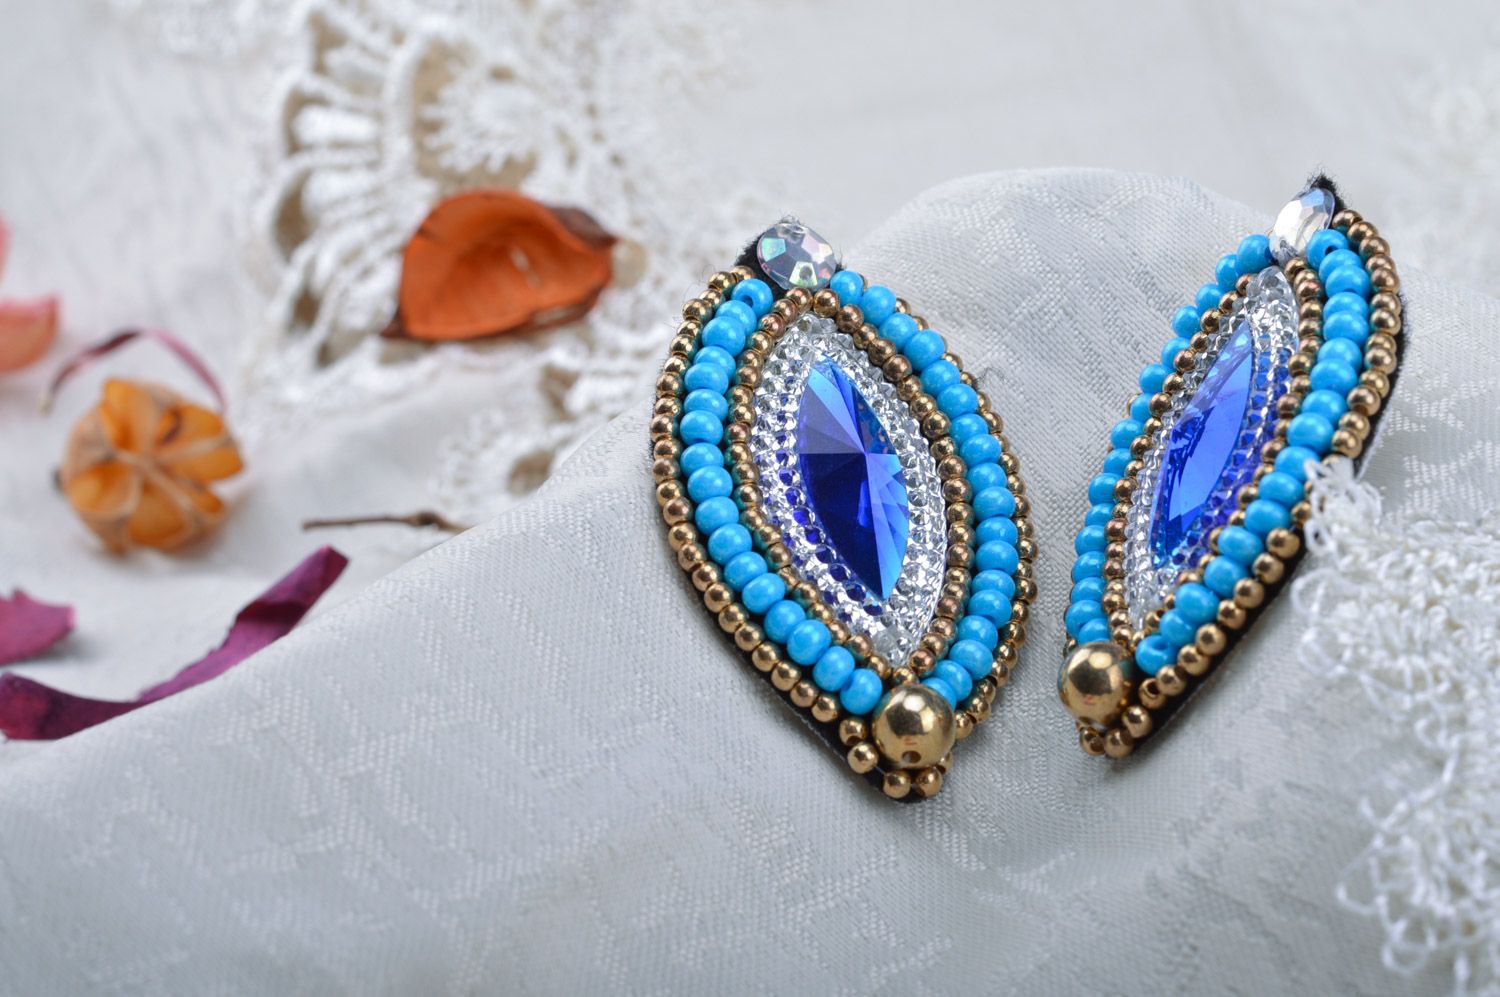 Handmade large stud earrings with beads and stones in blue color palette photo 4